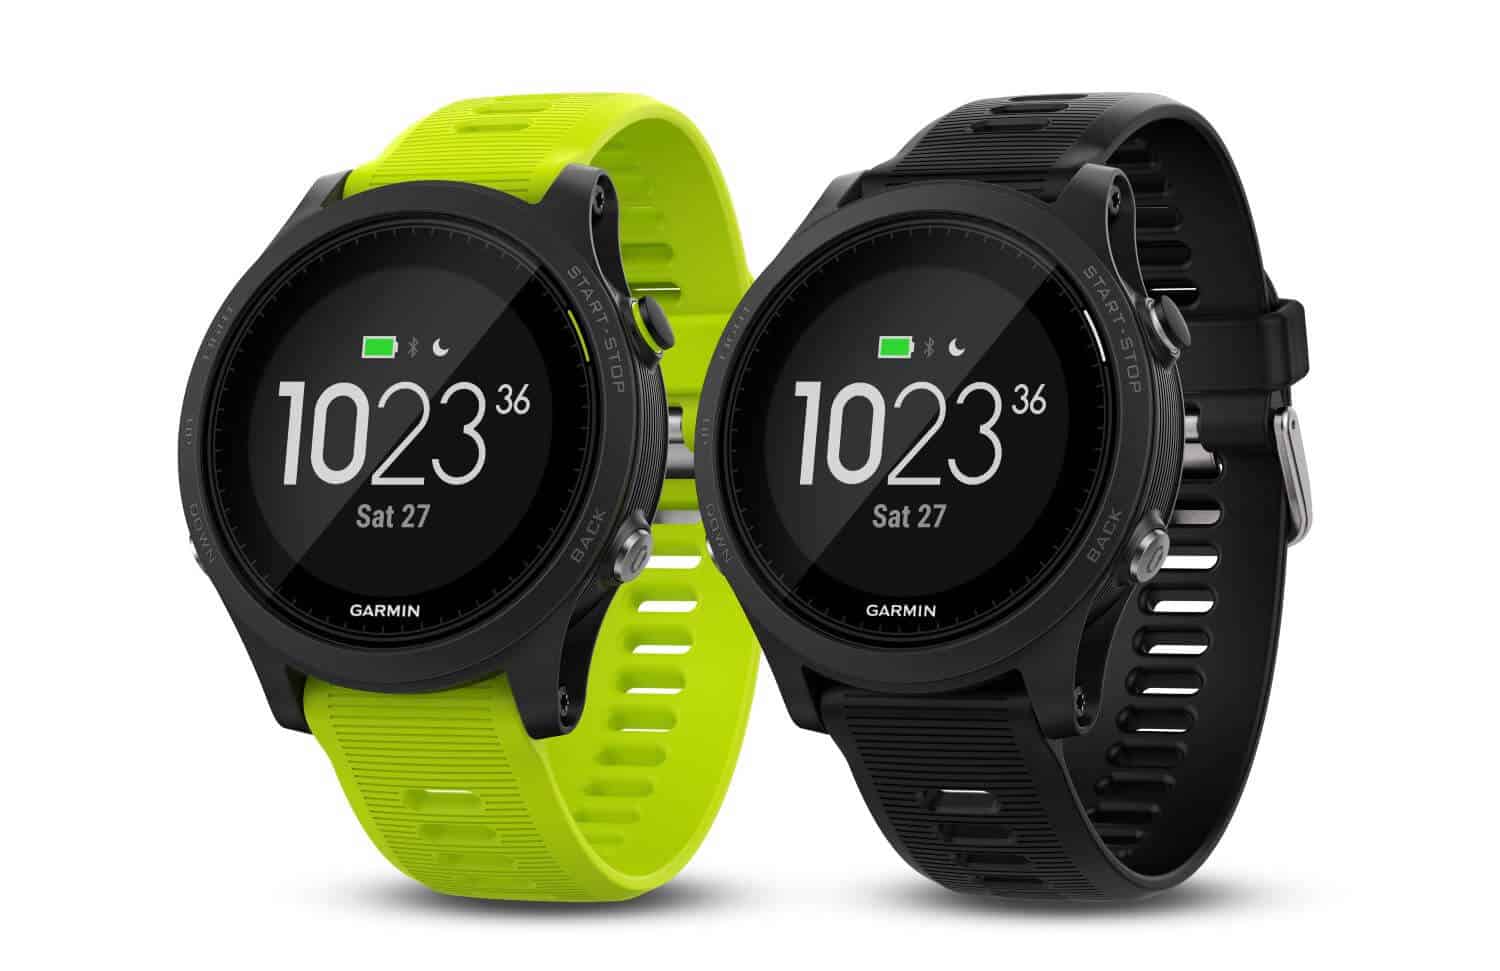 Top sports smartwatches 2023